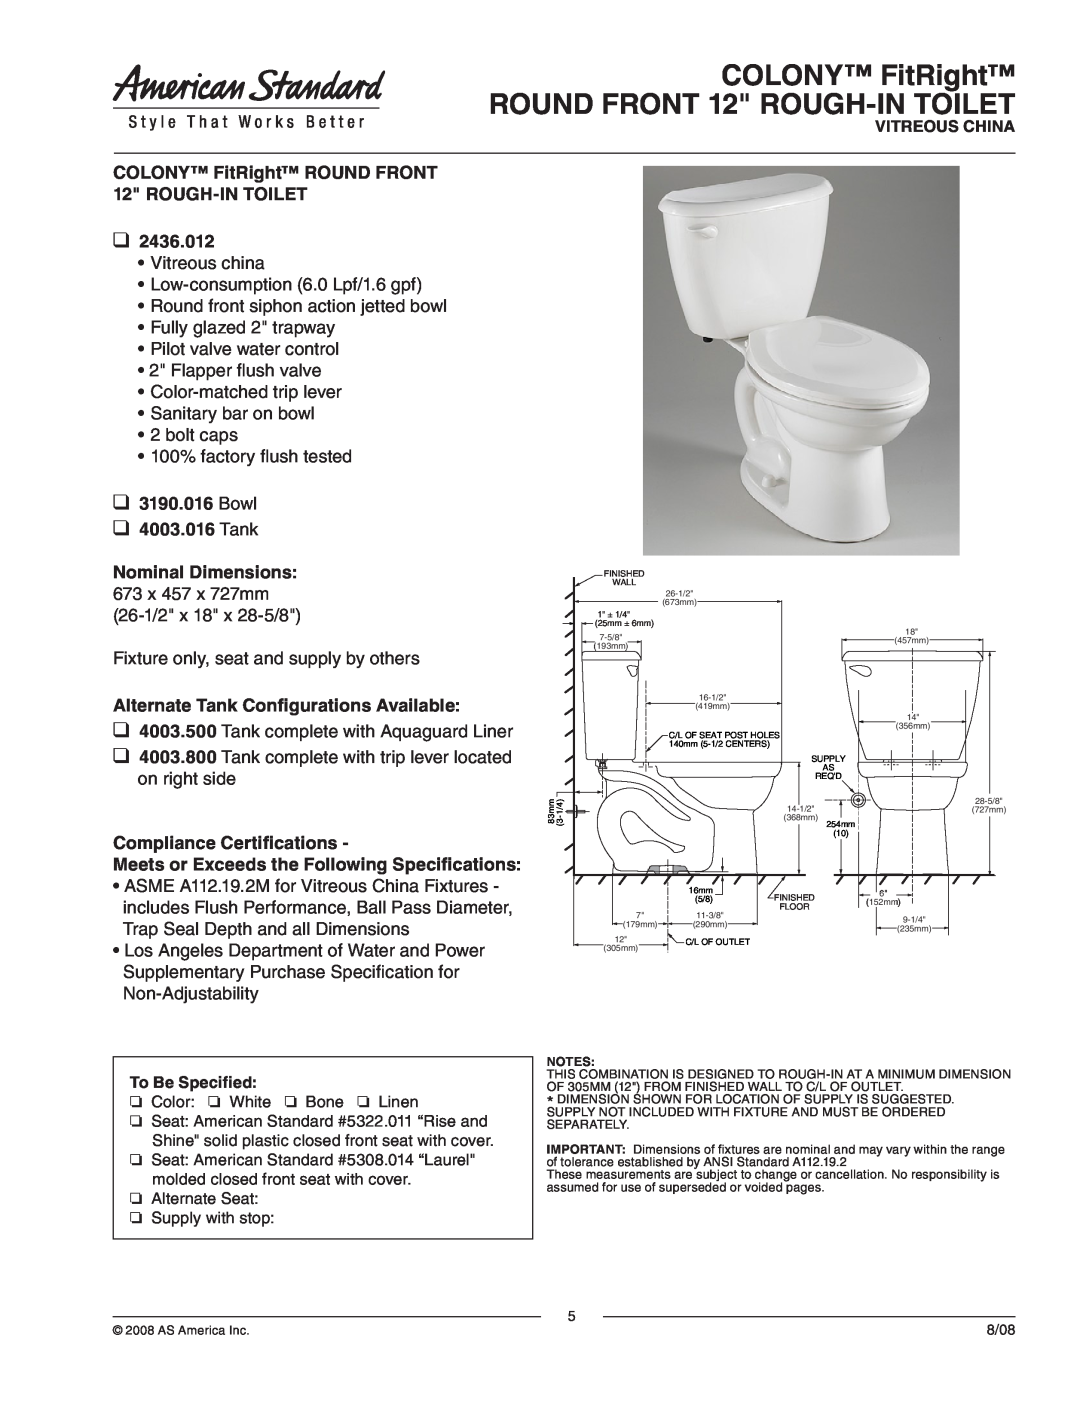 American Standard 2436.012 dimensions COLONY FitRight ROUND FRONT 12 ROUGH-INTOILET, Bowl 4003.016 Tank 